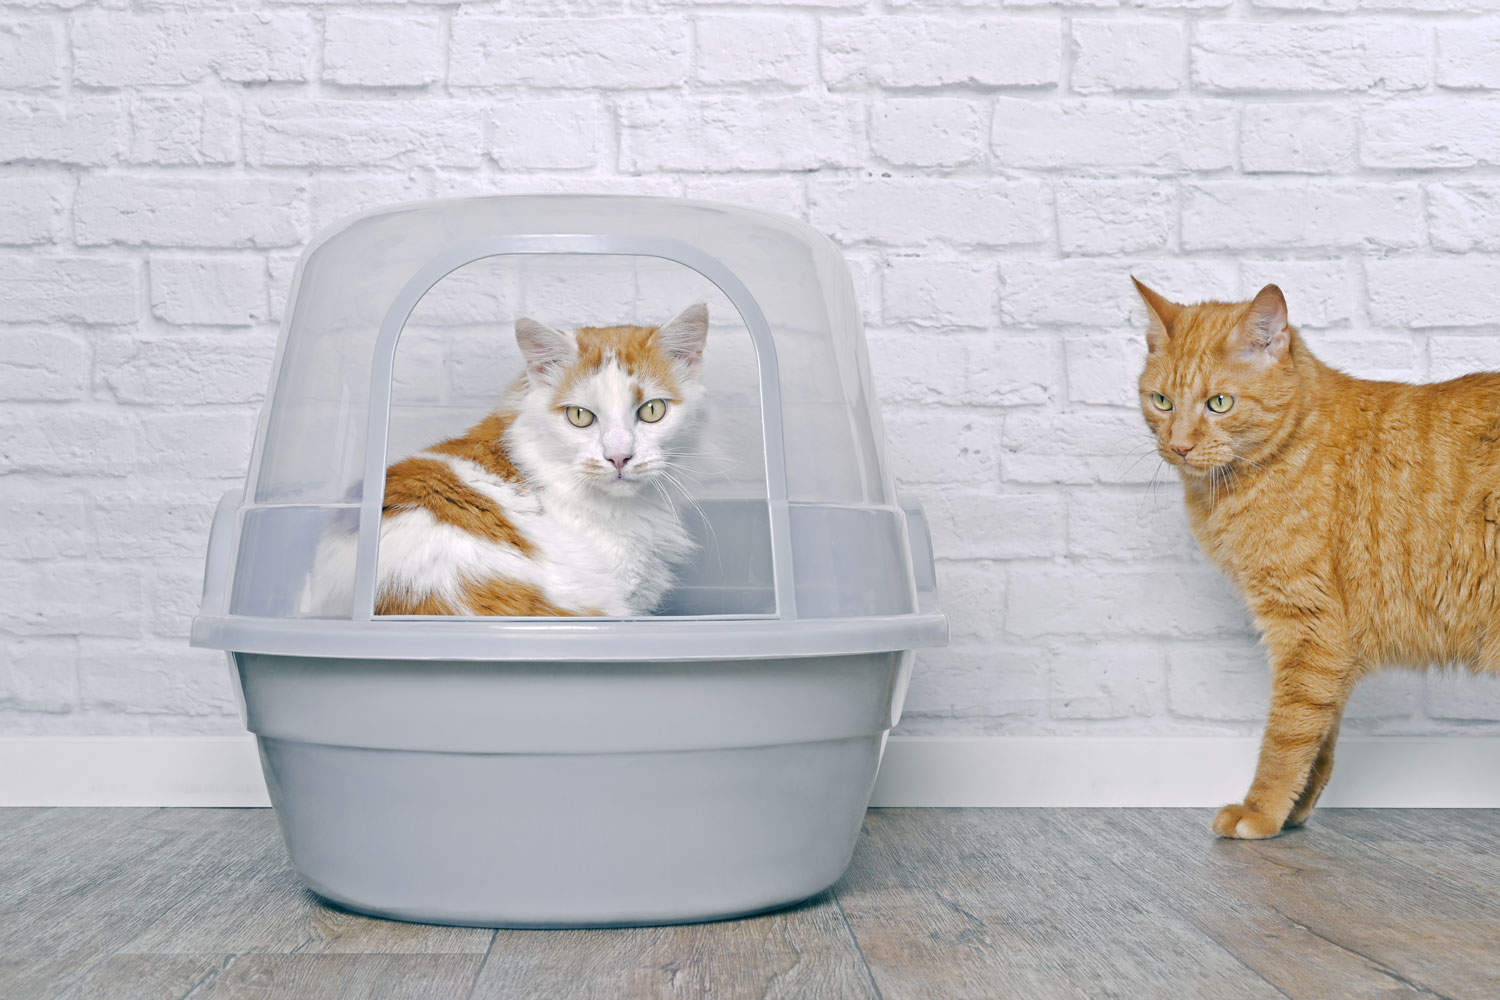 Red cat looks annoyed to a tabby cat in a closed litter box.
